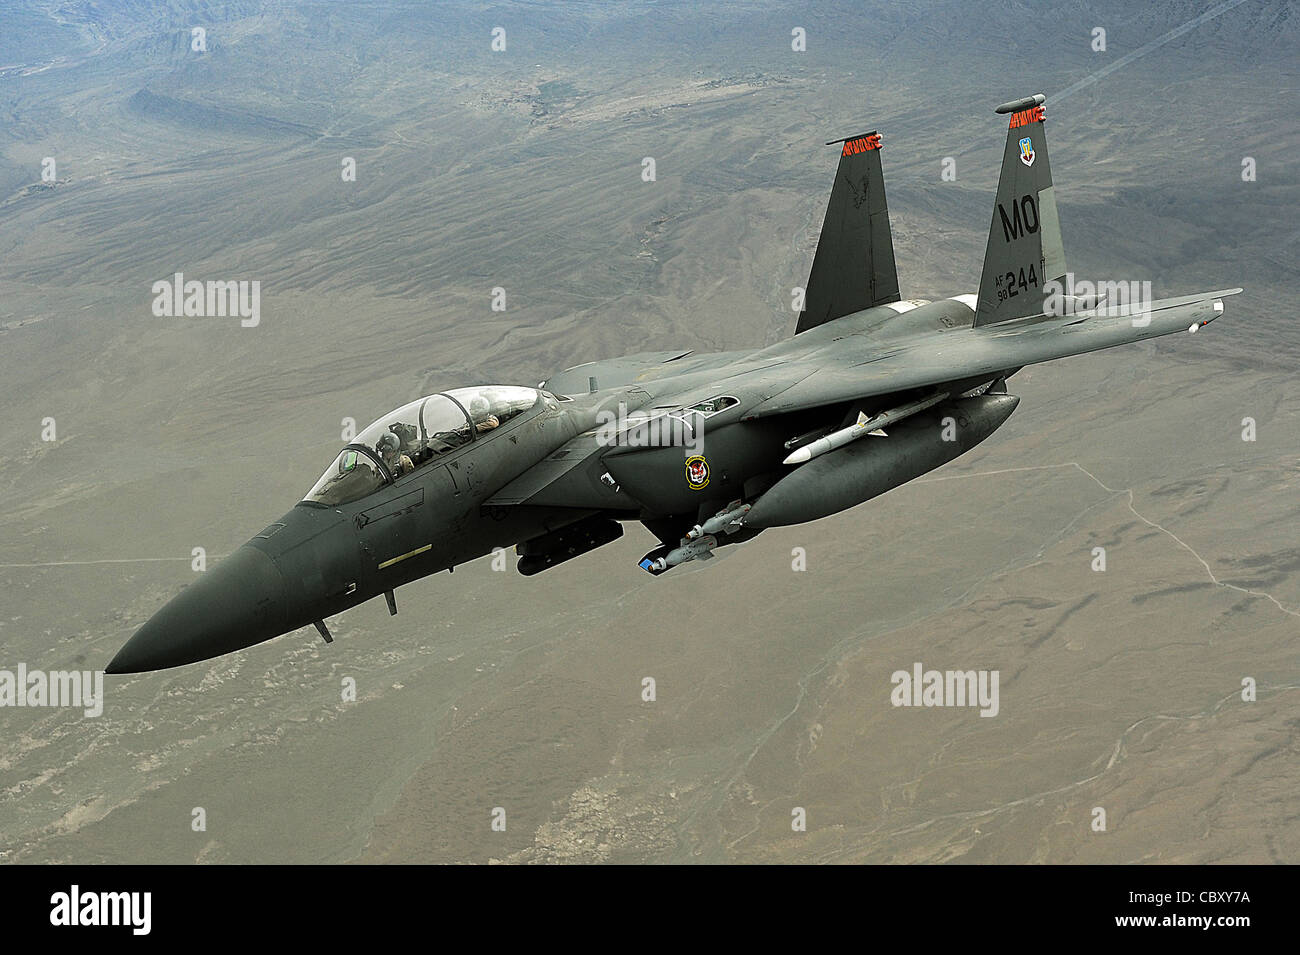 An F-15E Strike eagle conducts a mission over Afghanistan on Oct. 7. The F-15E Strike Eagle is a dual-role fighter designed to perform air-to-air and air-to-ground missions. An array of avionics and electronics systems gives the F-15E the capability to fight at low altitude, day or night, and in all weather. ( Stock Photo